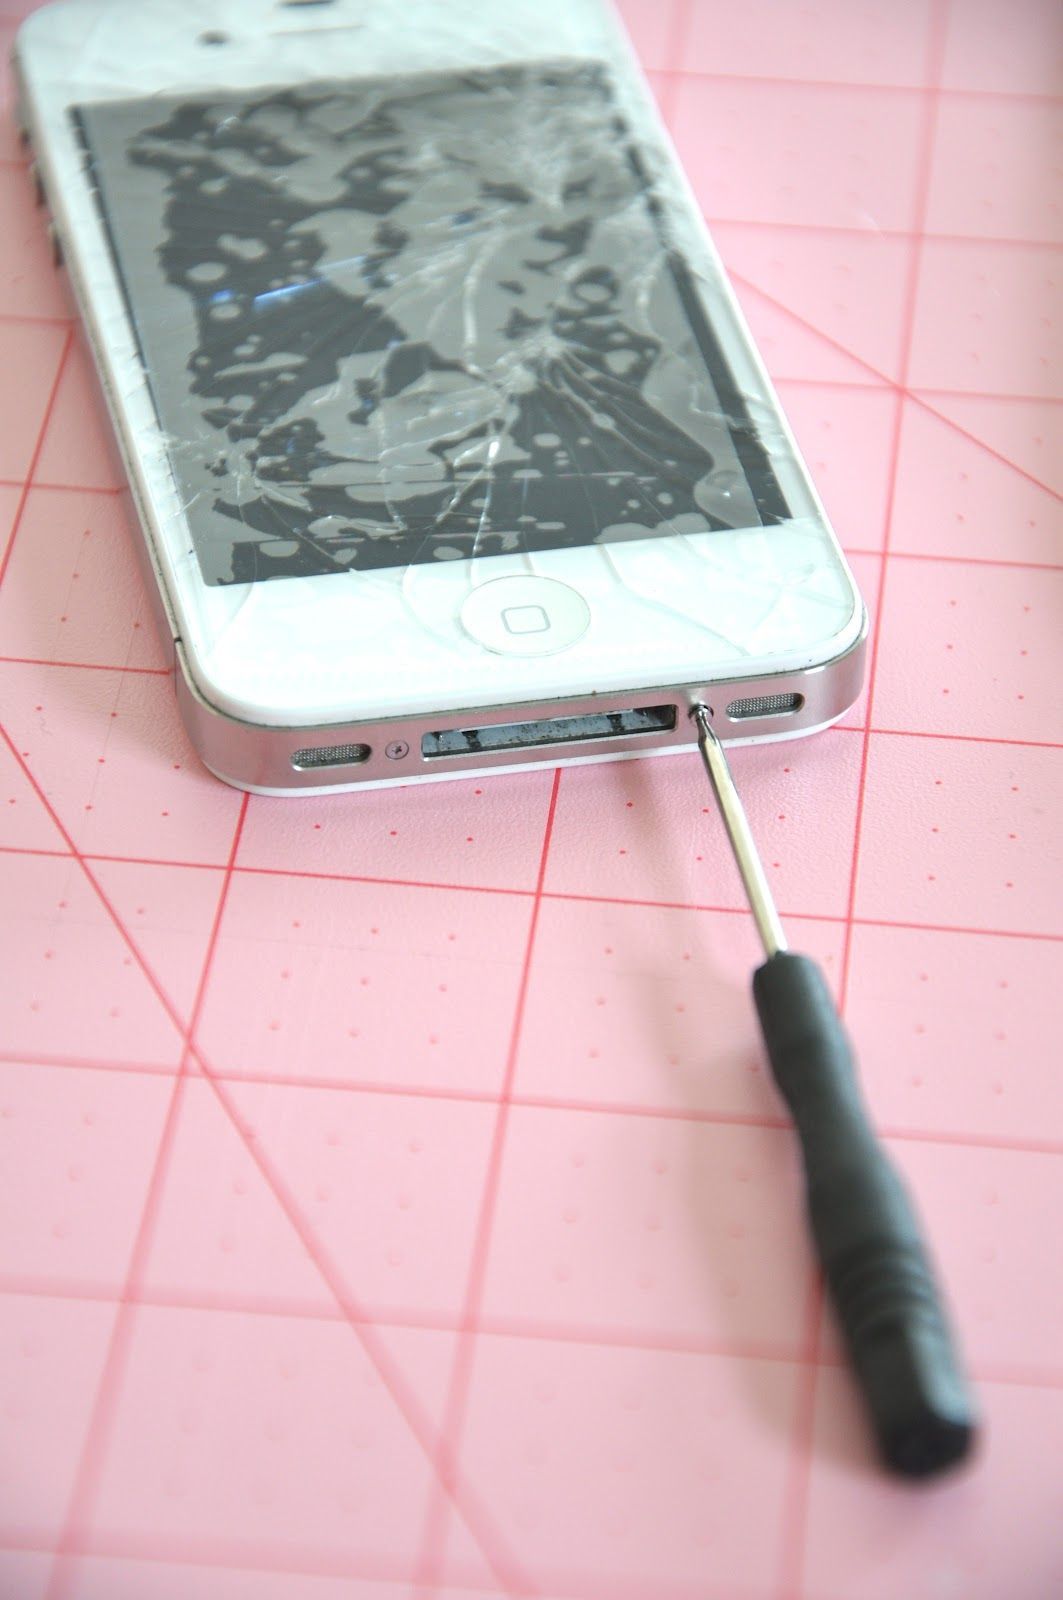 How to replace your iPhone 4 screen: Good to know! I might need this one day